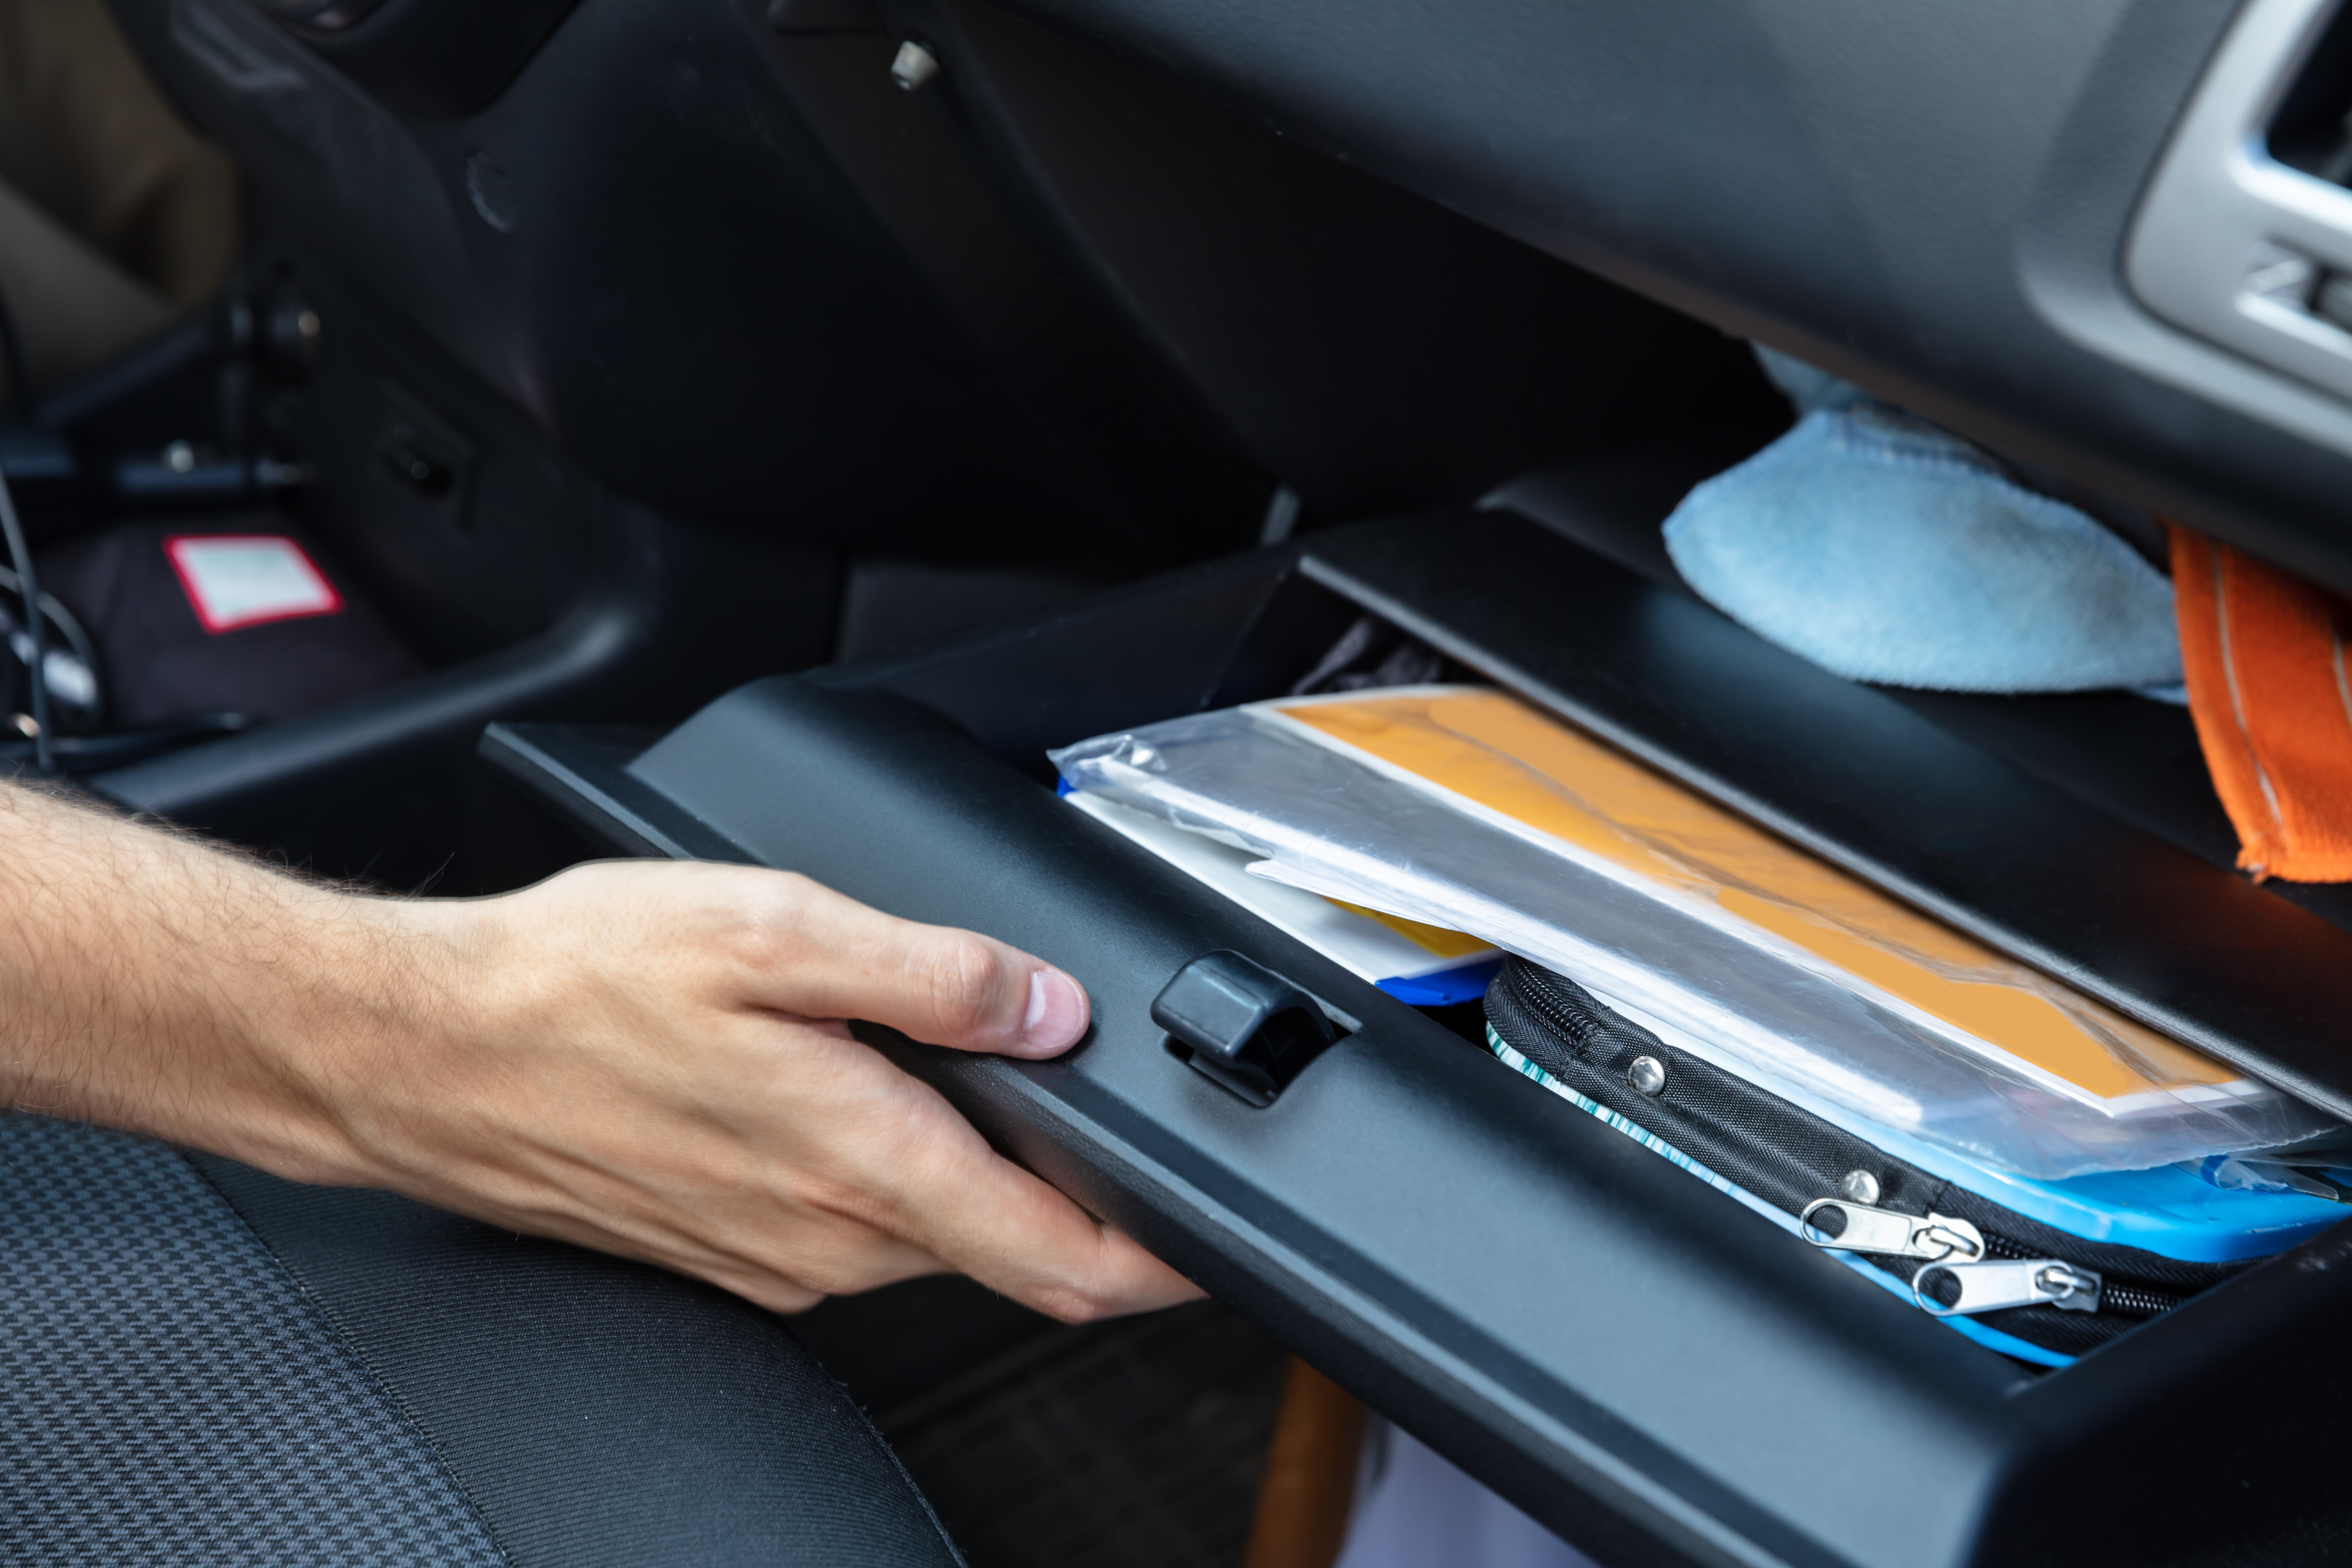 A person holds open the glovebox of a car, which contains documents and file holders.